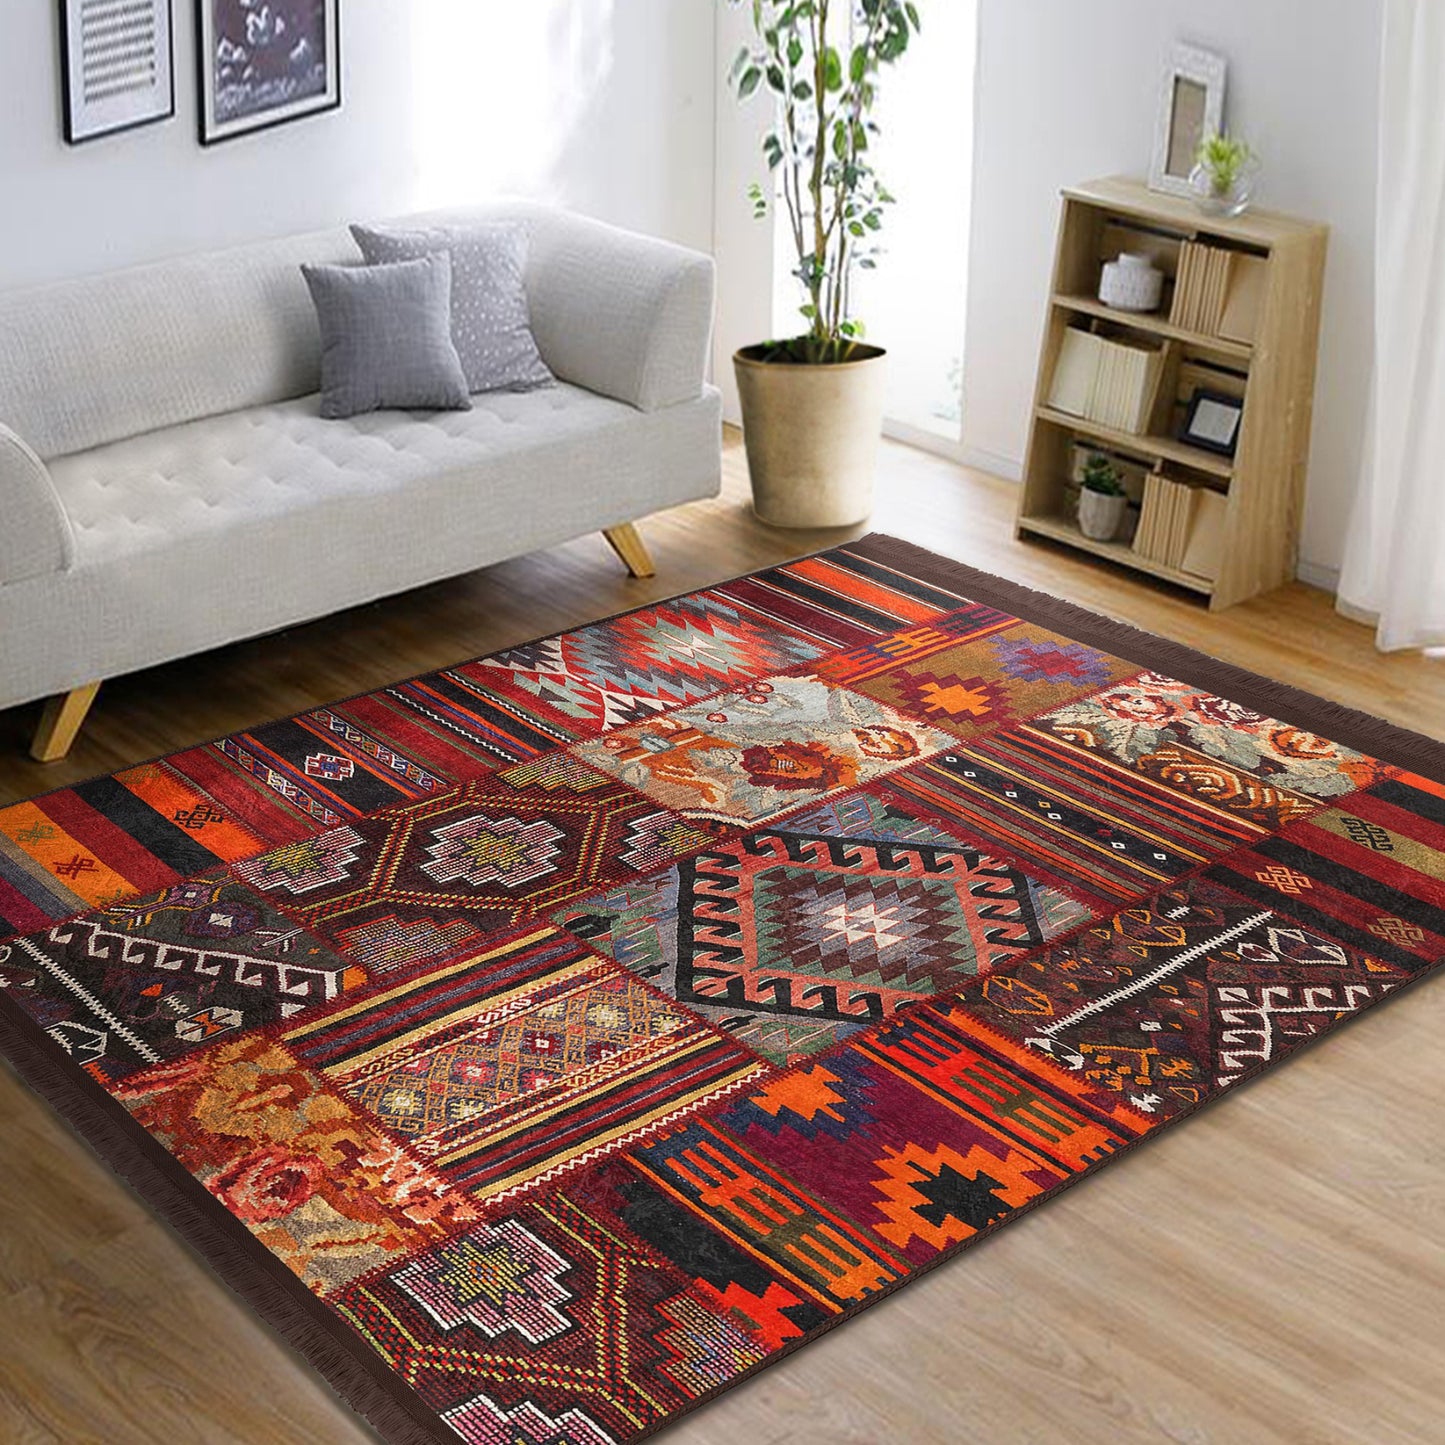 Classic Ethnic Rug for a Stylish and Cultural Living Space